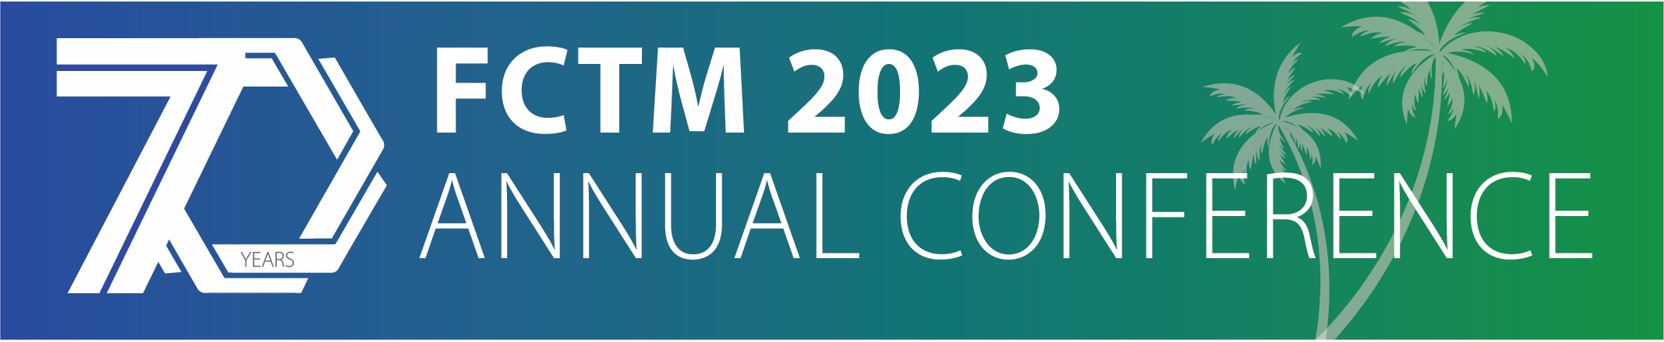 70th FCTM Annual Conference in Florida